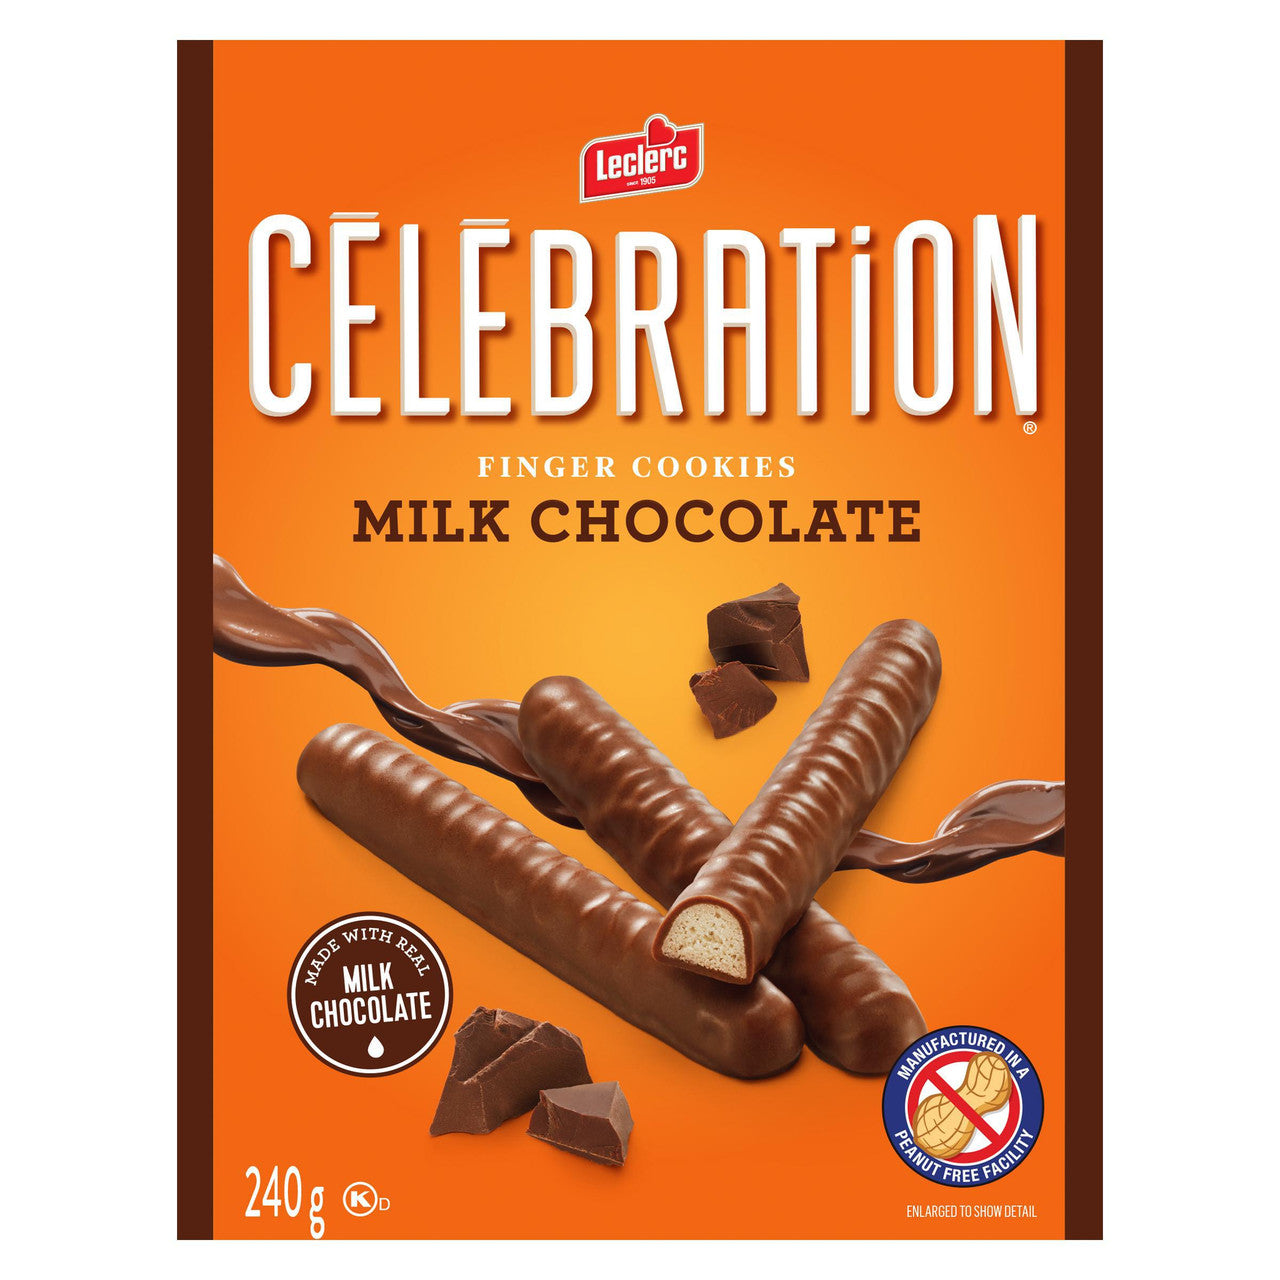 Leclerc Celebration Milk Chocolate Finger Cookies, 240g/8.5 oz. Box {Imported from Canada}